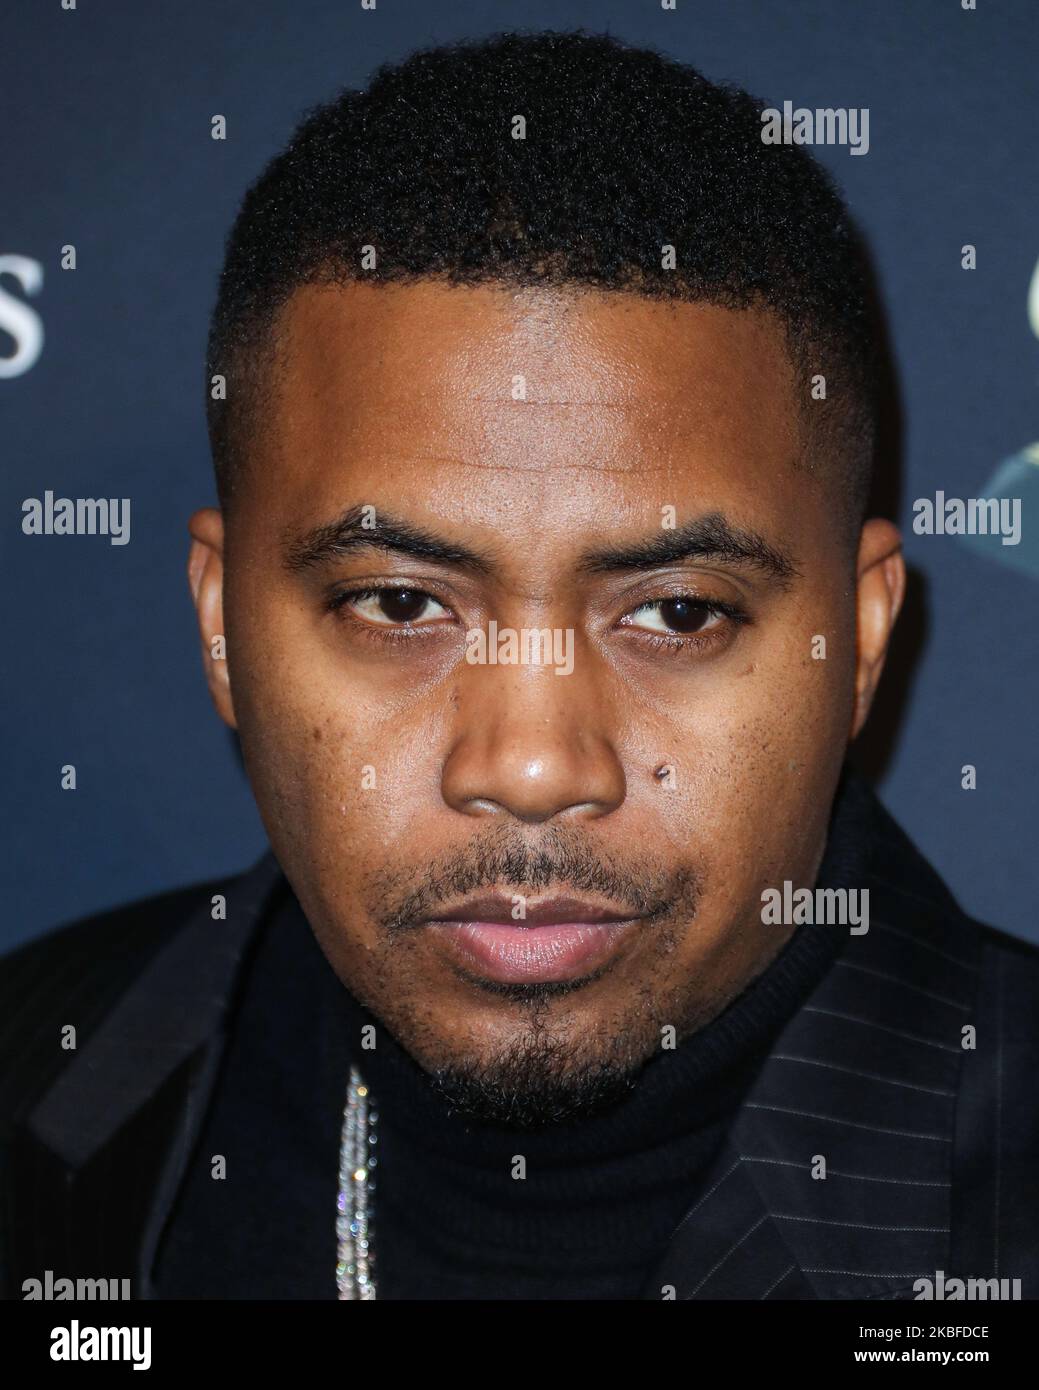 BEVERLY HILLS, LOS ANGELES, CALIFORNIA, USA - JANUARY 25: Nas arrives at The Recording Academy And Clive Davis' 2020 Pre-GRAMMY Gala held at The Beverly Hilton Hotel on January 25, 2020 in Beverly Hills, Los Angeles, California, United States. (Photo by Xavier Collin/Image Press Agency/NurPhoto) Stock Photo